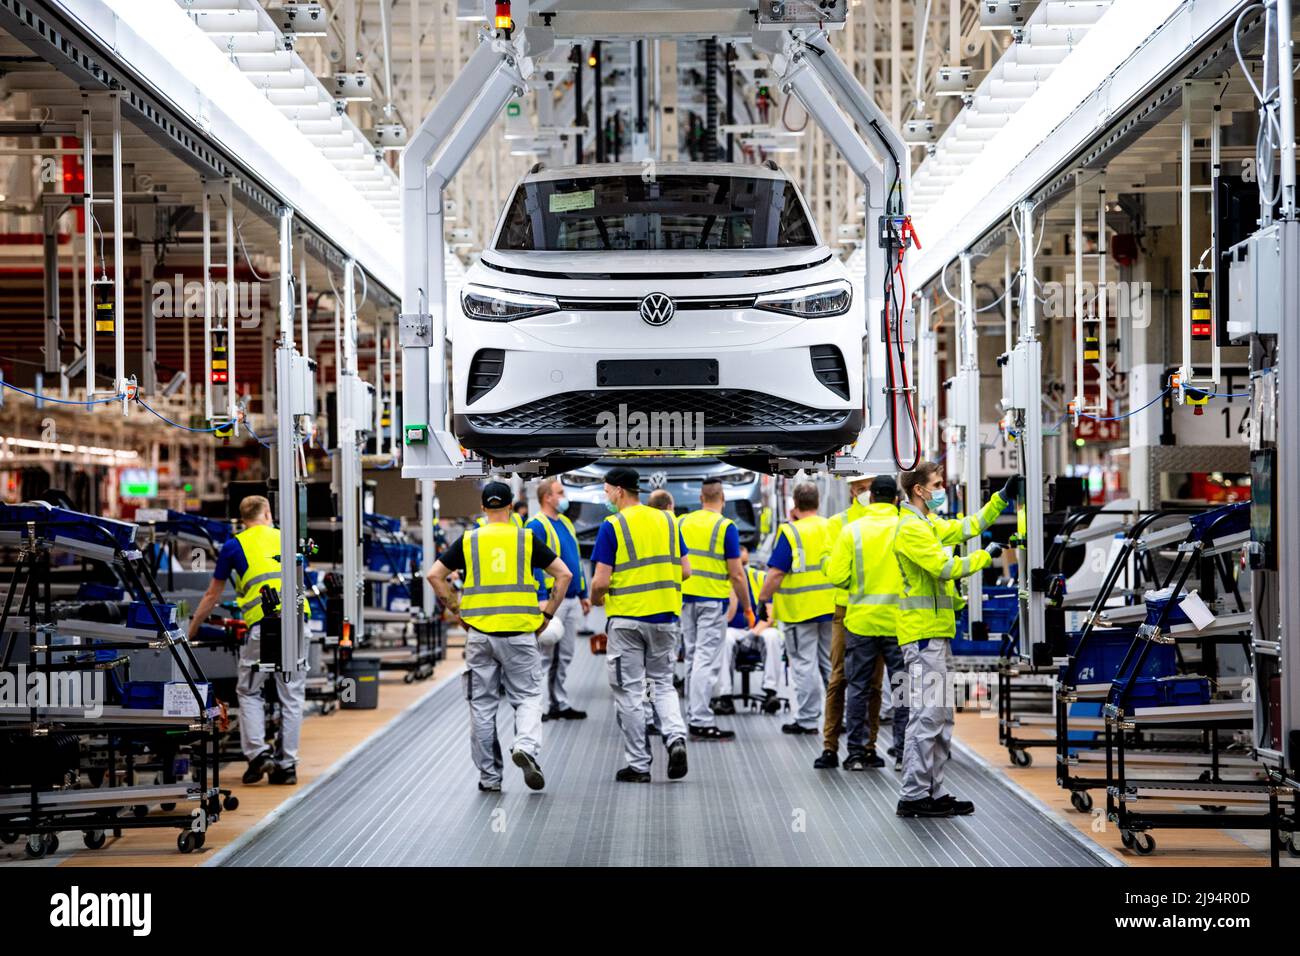 Emden, Germany. 20th May, 2022. VW employees work on the ID.4. Volkswagen has started series production of the all-electric ID.4 compact SUV at its plant in Emden, East Frisia. After the start-up phase, 4000 e-vehicles per week are to be produced in Emden by the end of the year. Credit: Sina Schuldt/dpa/Alamy Live News Stock Photo